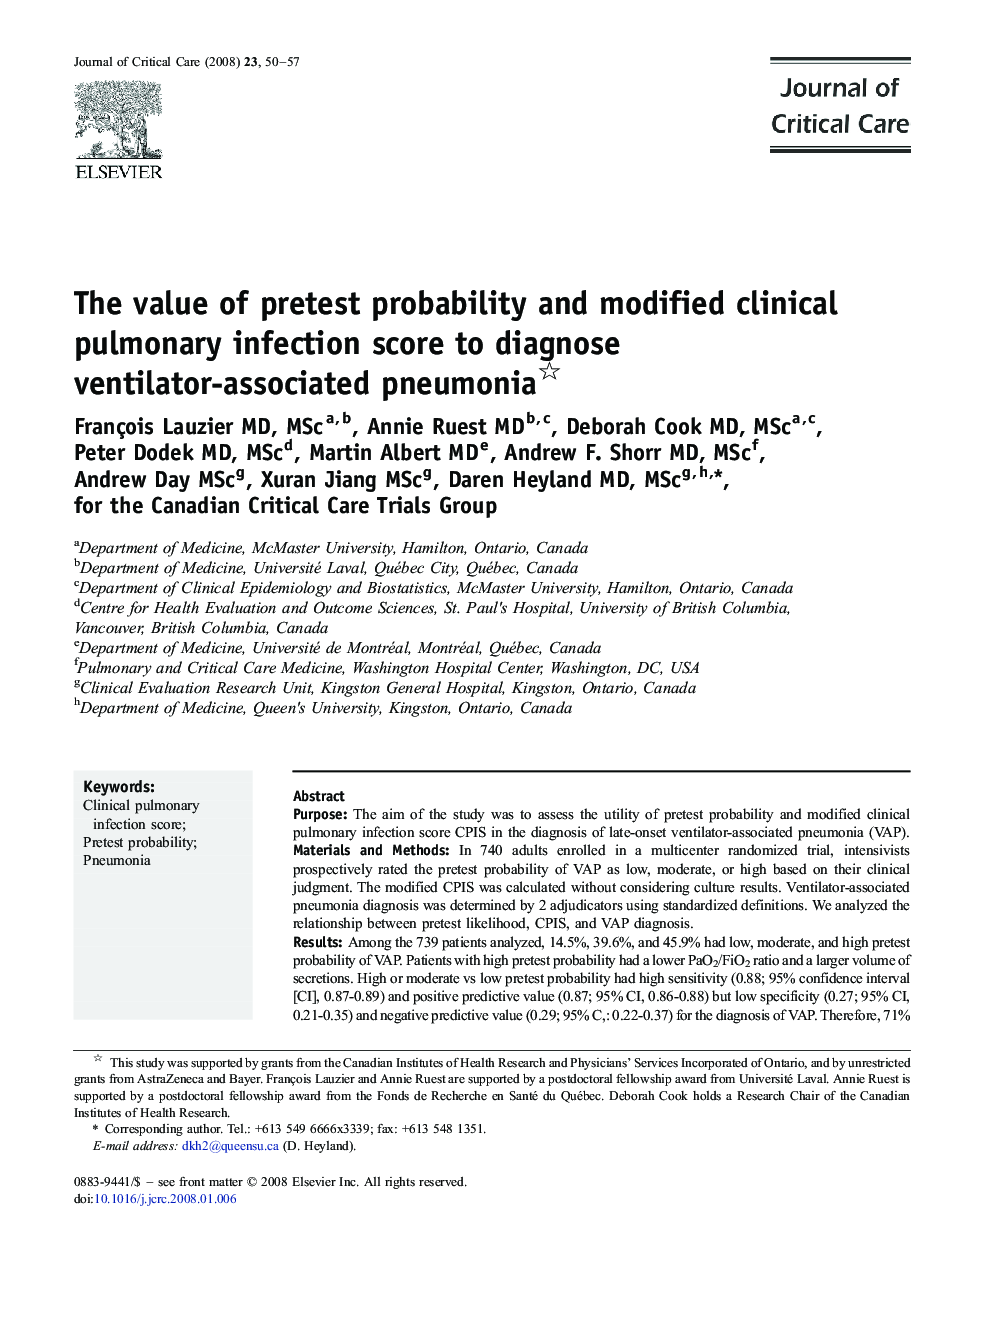 The value of pretest probability and modified clinical pulmonary infection score to diagnose ventilator-associated pneumonia